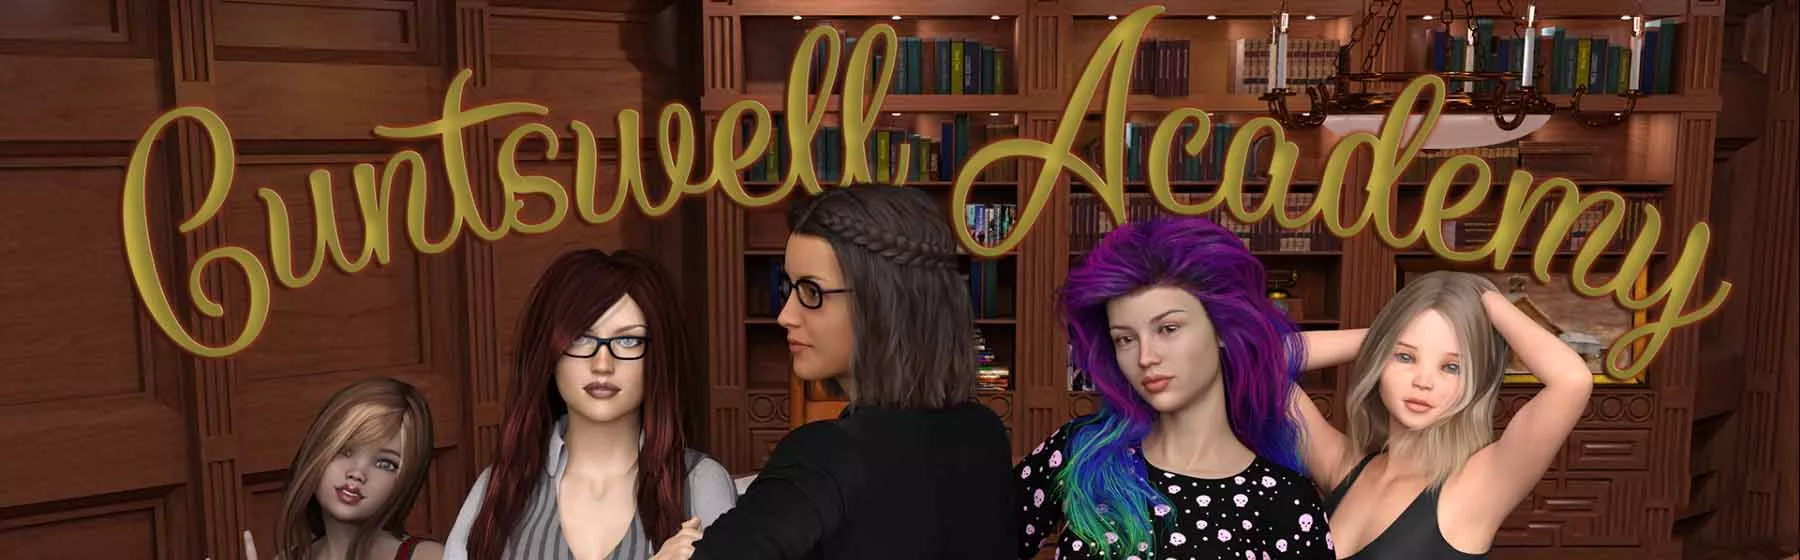 Cuntswell Academy 3d巨乳セックスゲーム